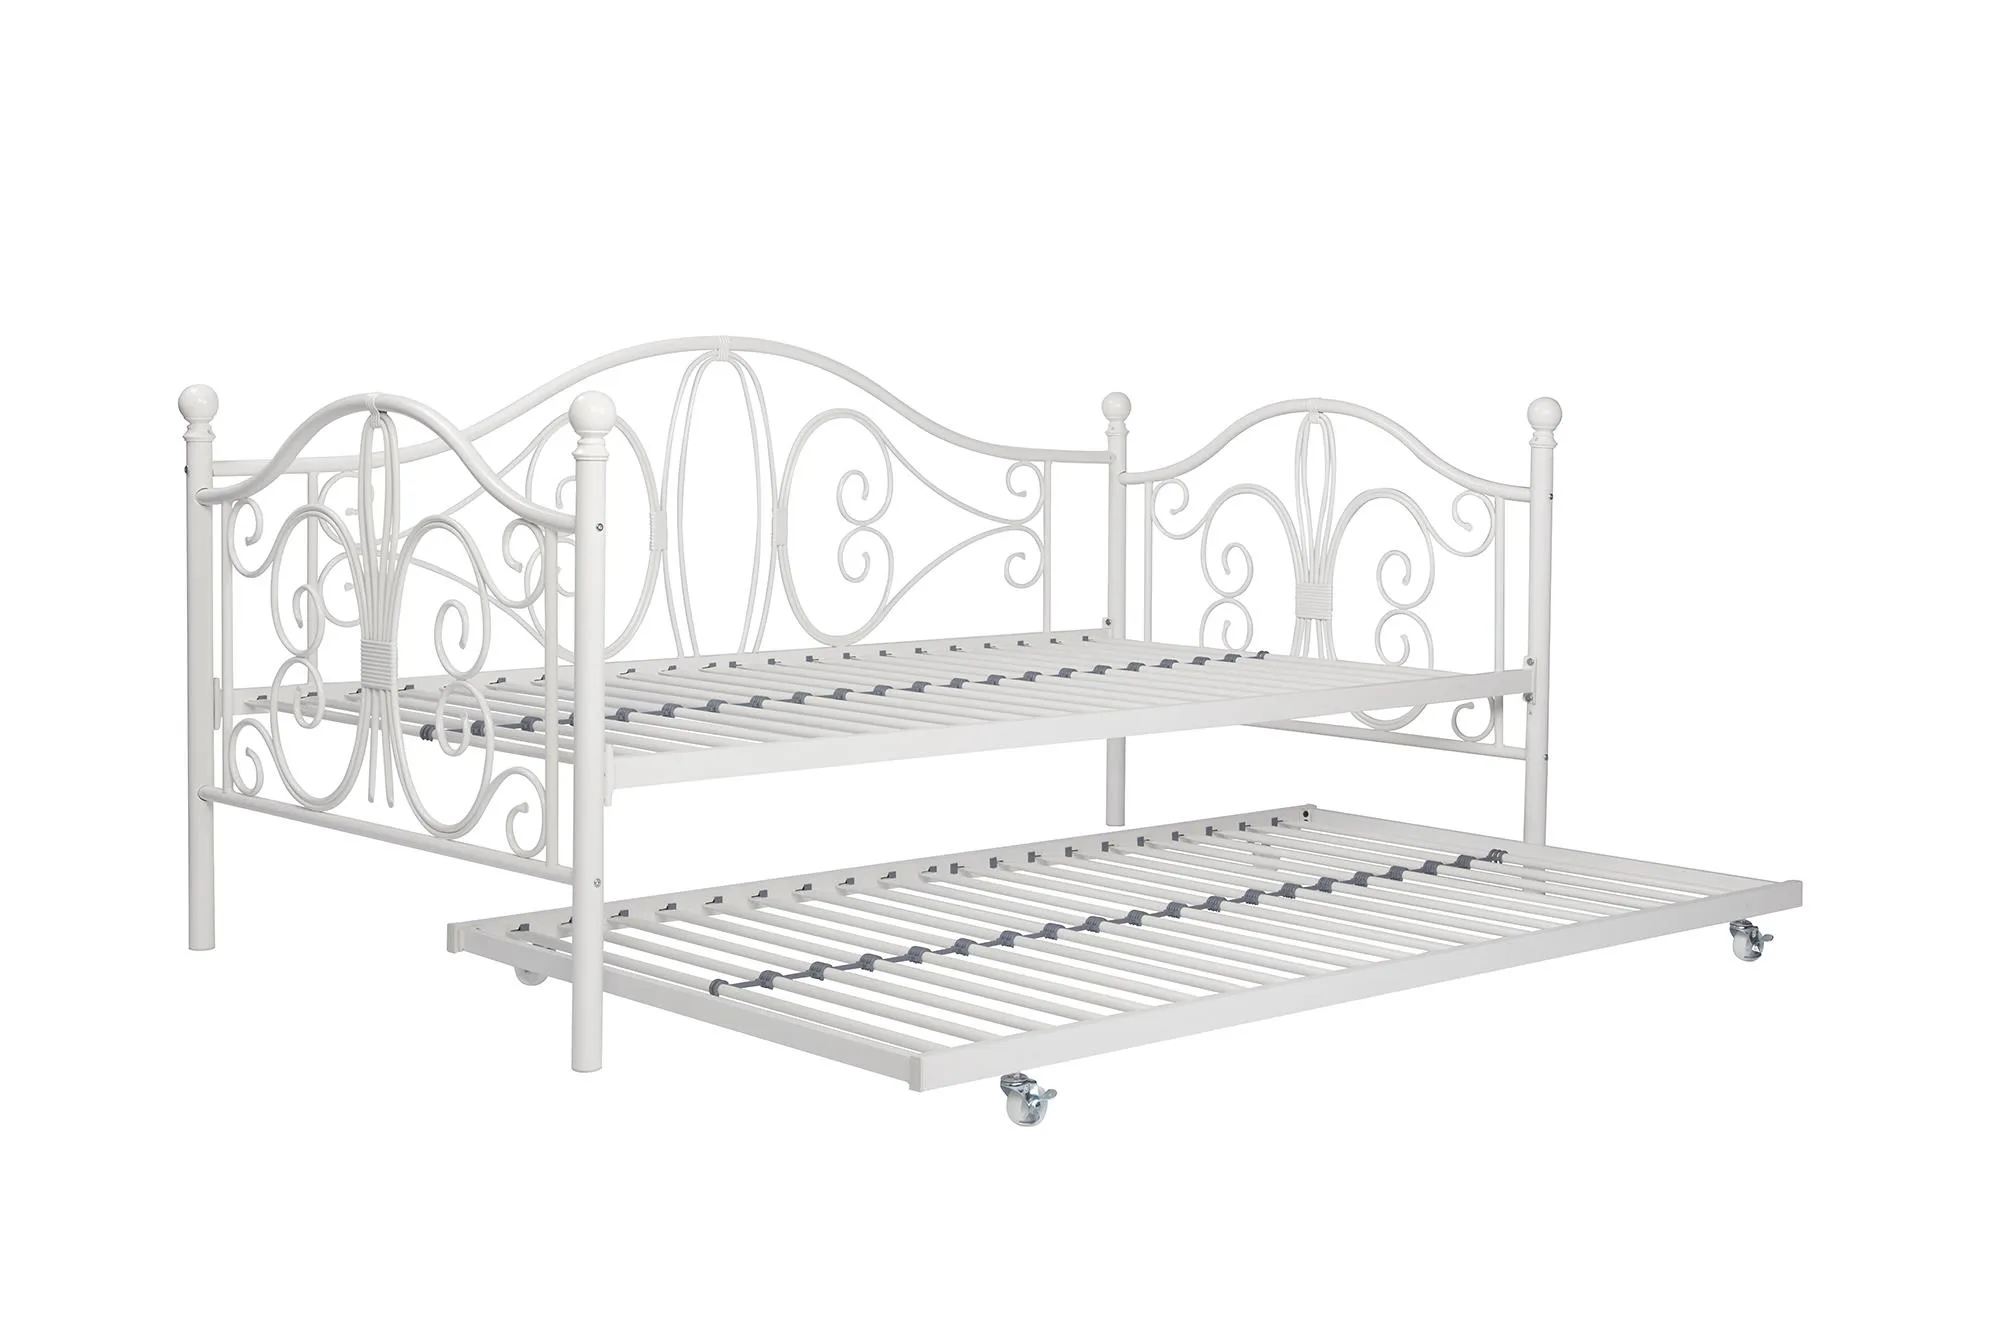 Atwater Living Bradford Metal Twin Daybed & Trundle, White